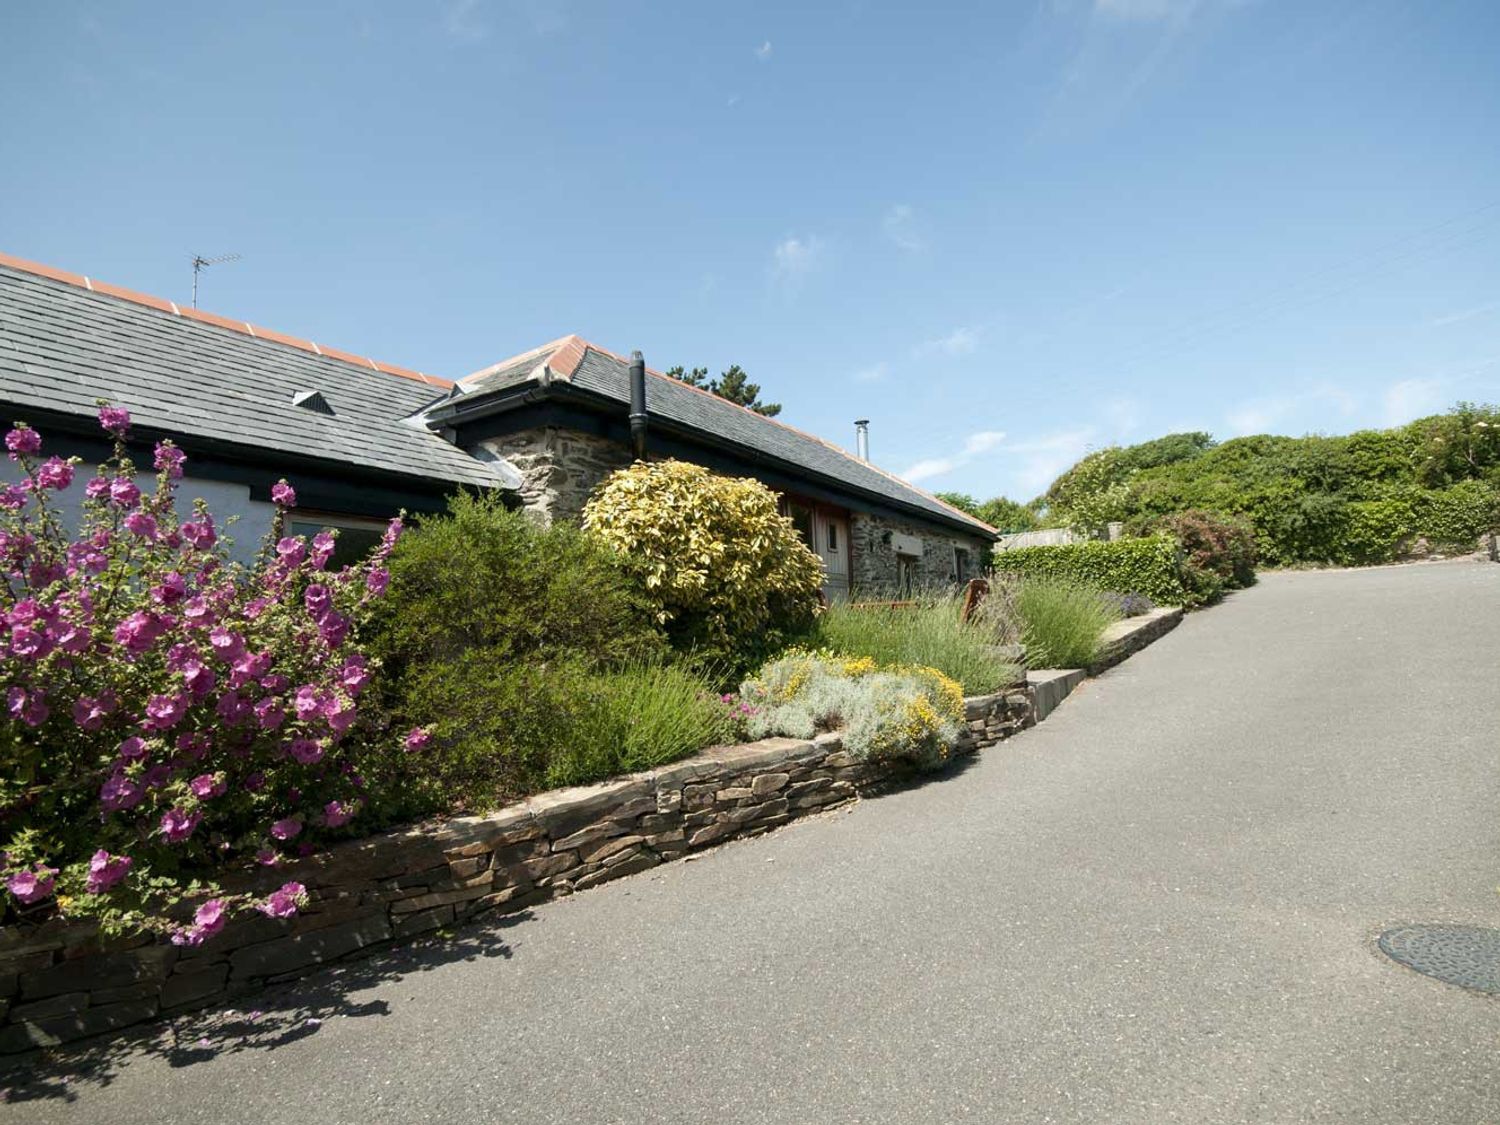 1 bedroom Cottage for rent in Newquay, Cornwall